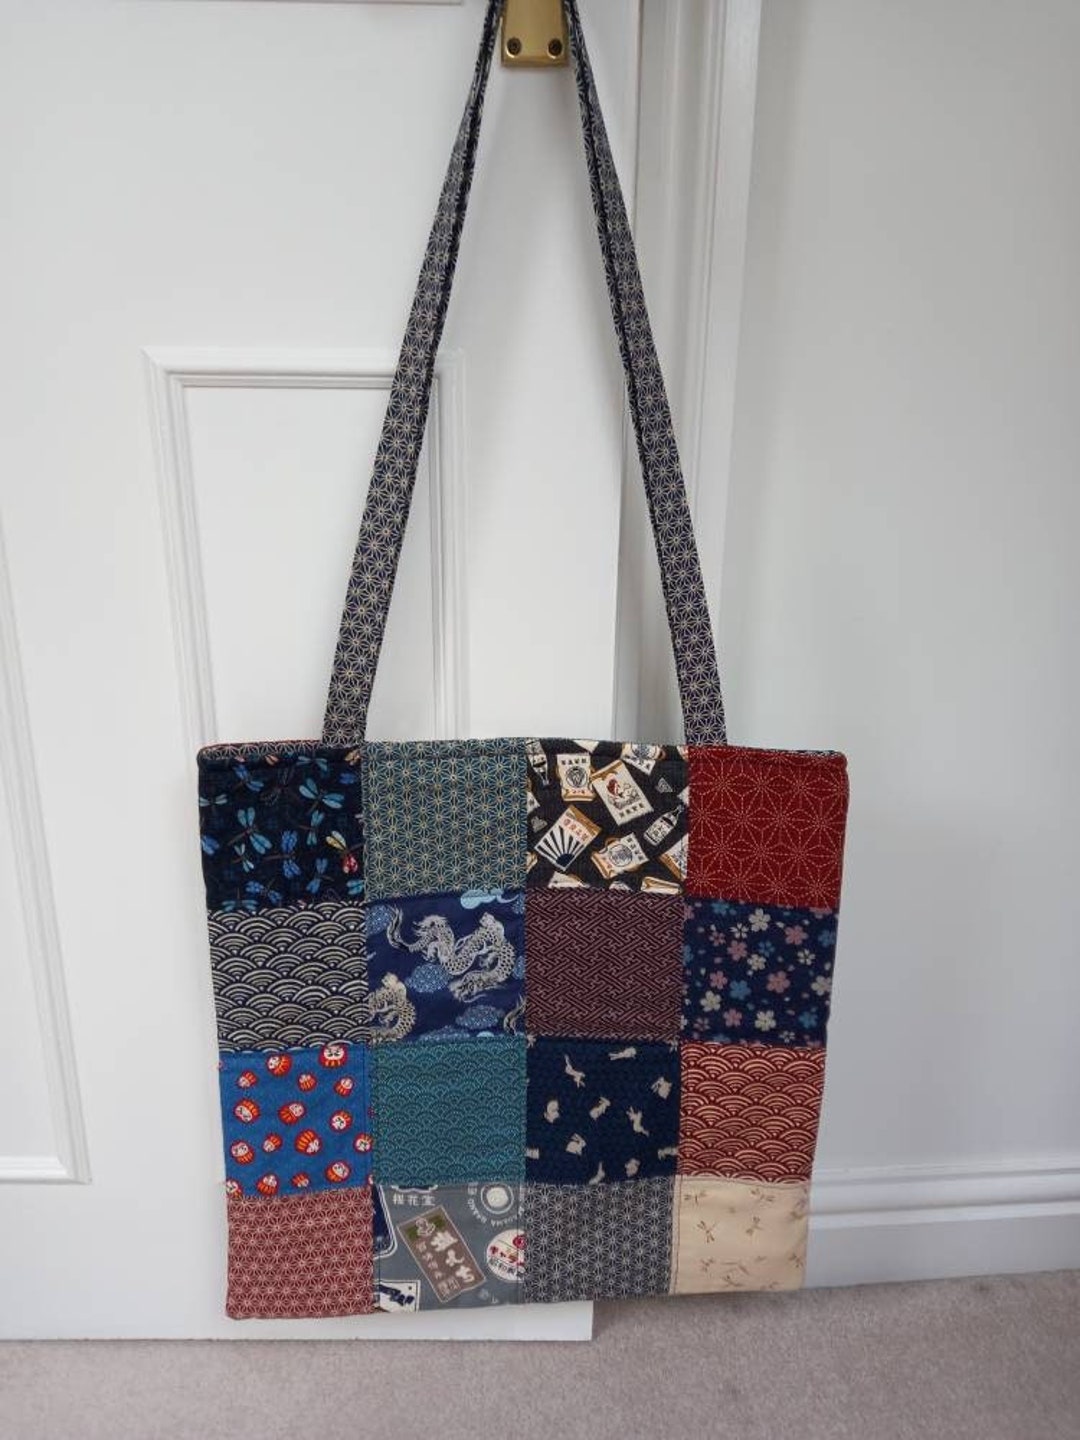 Oriental Patchwork Tote Bag Handmade Lined Shopping Bag 